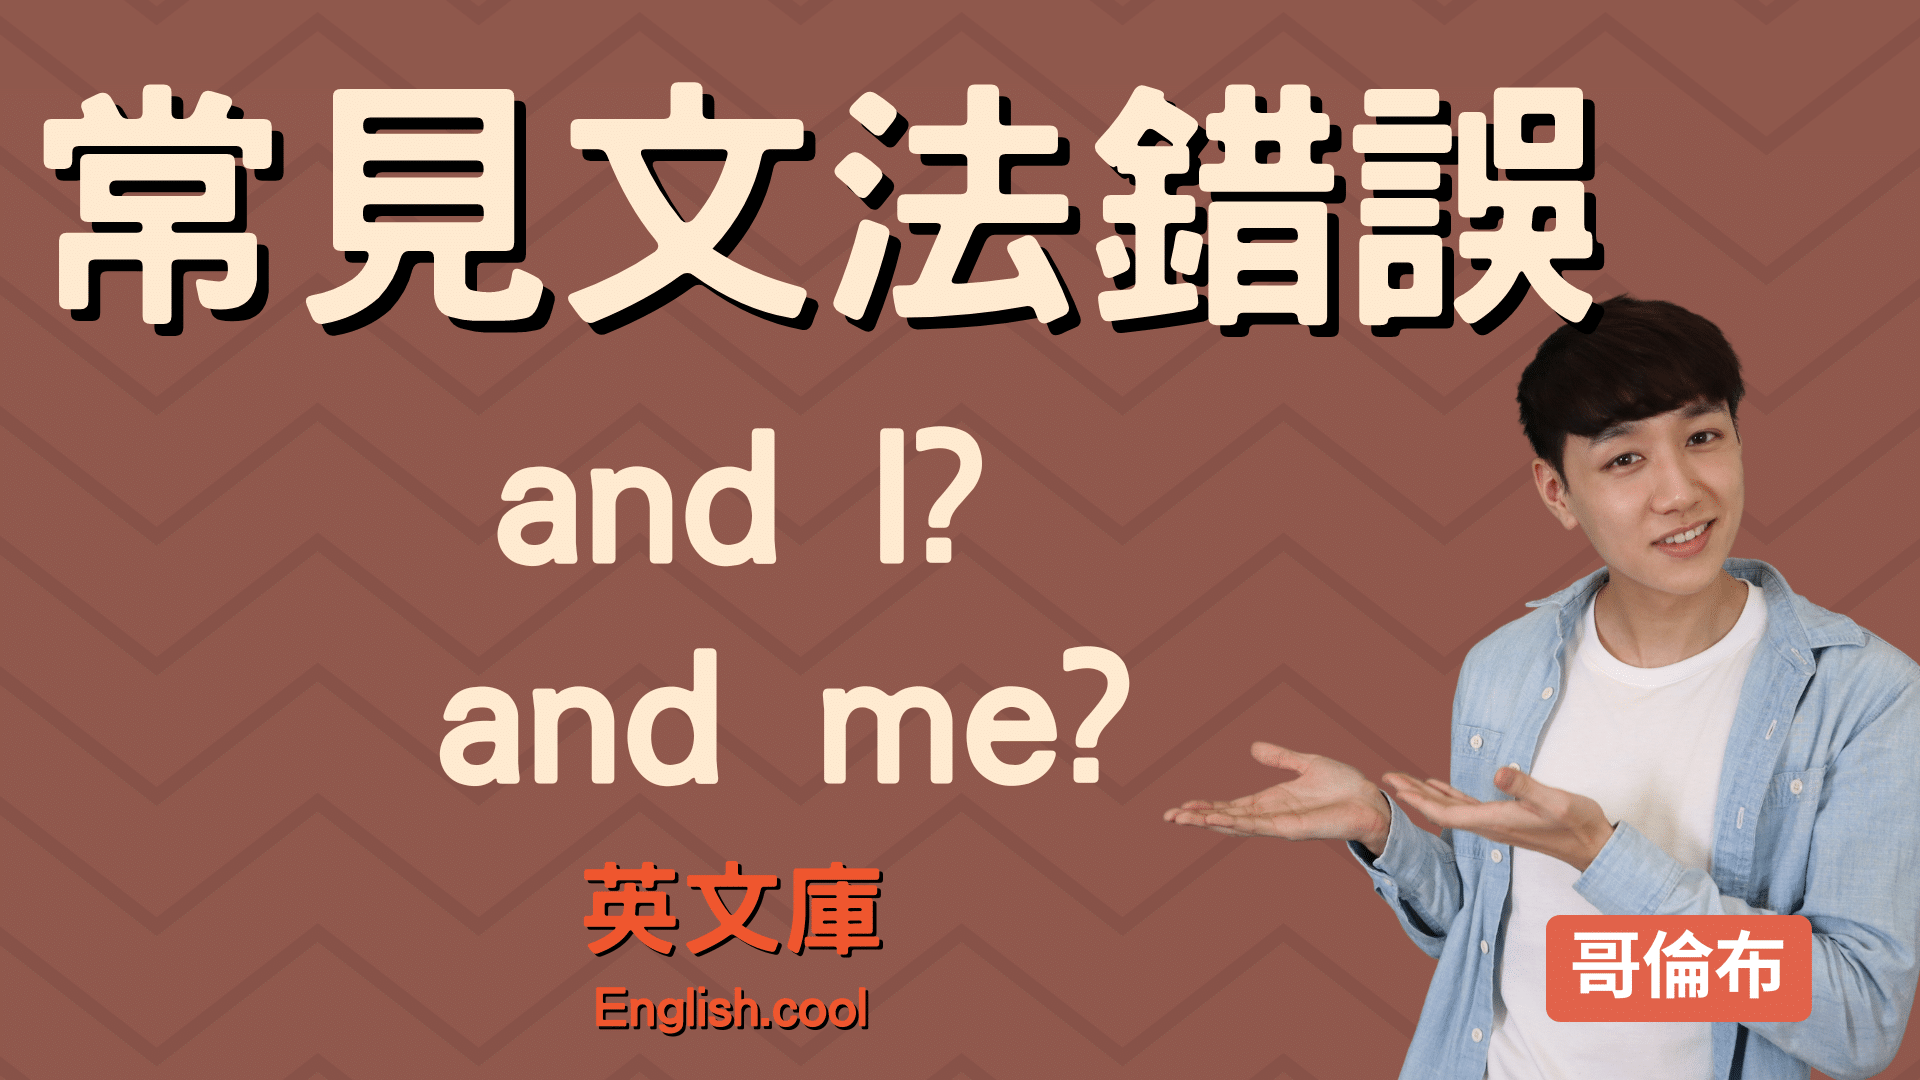 You are currently viewing 【常見文法錯誤】”and I” 還是 “and me”? 一次搞懂各種錯誤的英文句子！